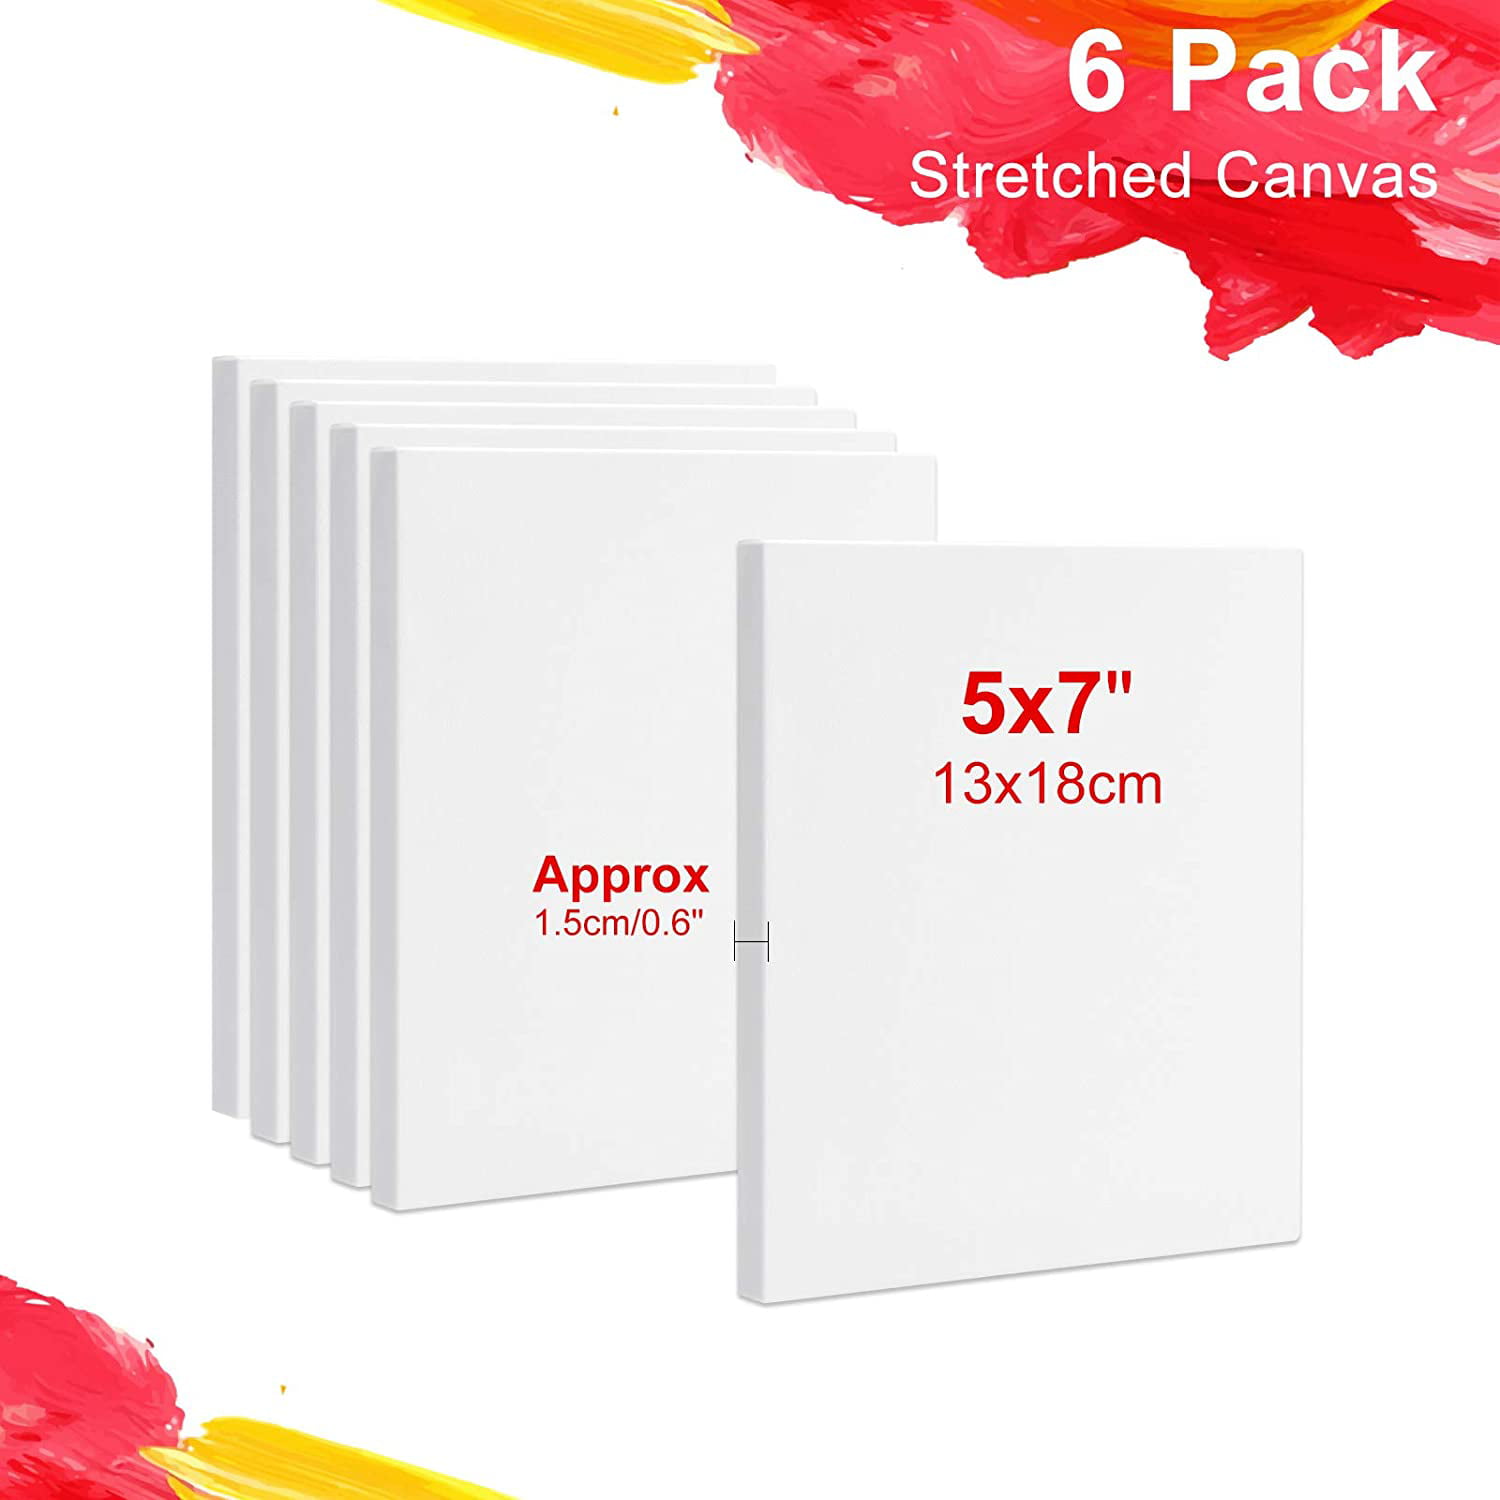 13x18cm TUPARKA 5X7 Inch Stretched White Blank Canvas 6 Pack Mini Pre-Stretched Canvas for Acrylics Oils Painting Media 